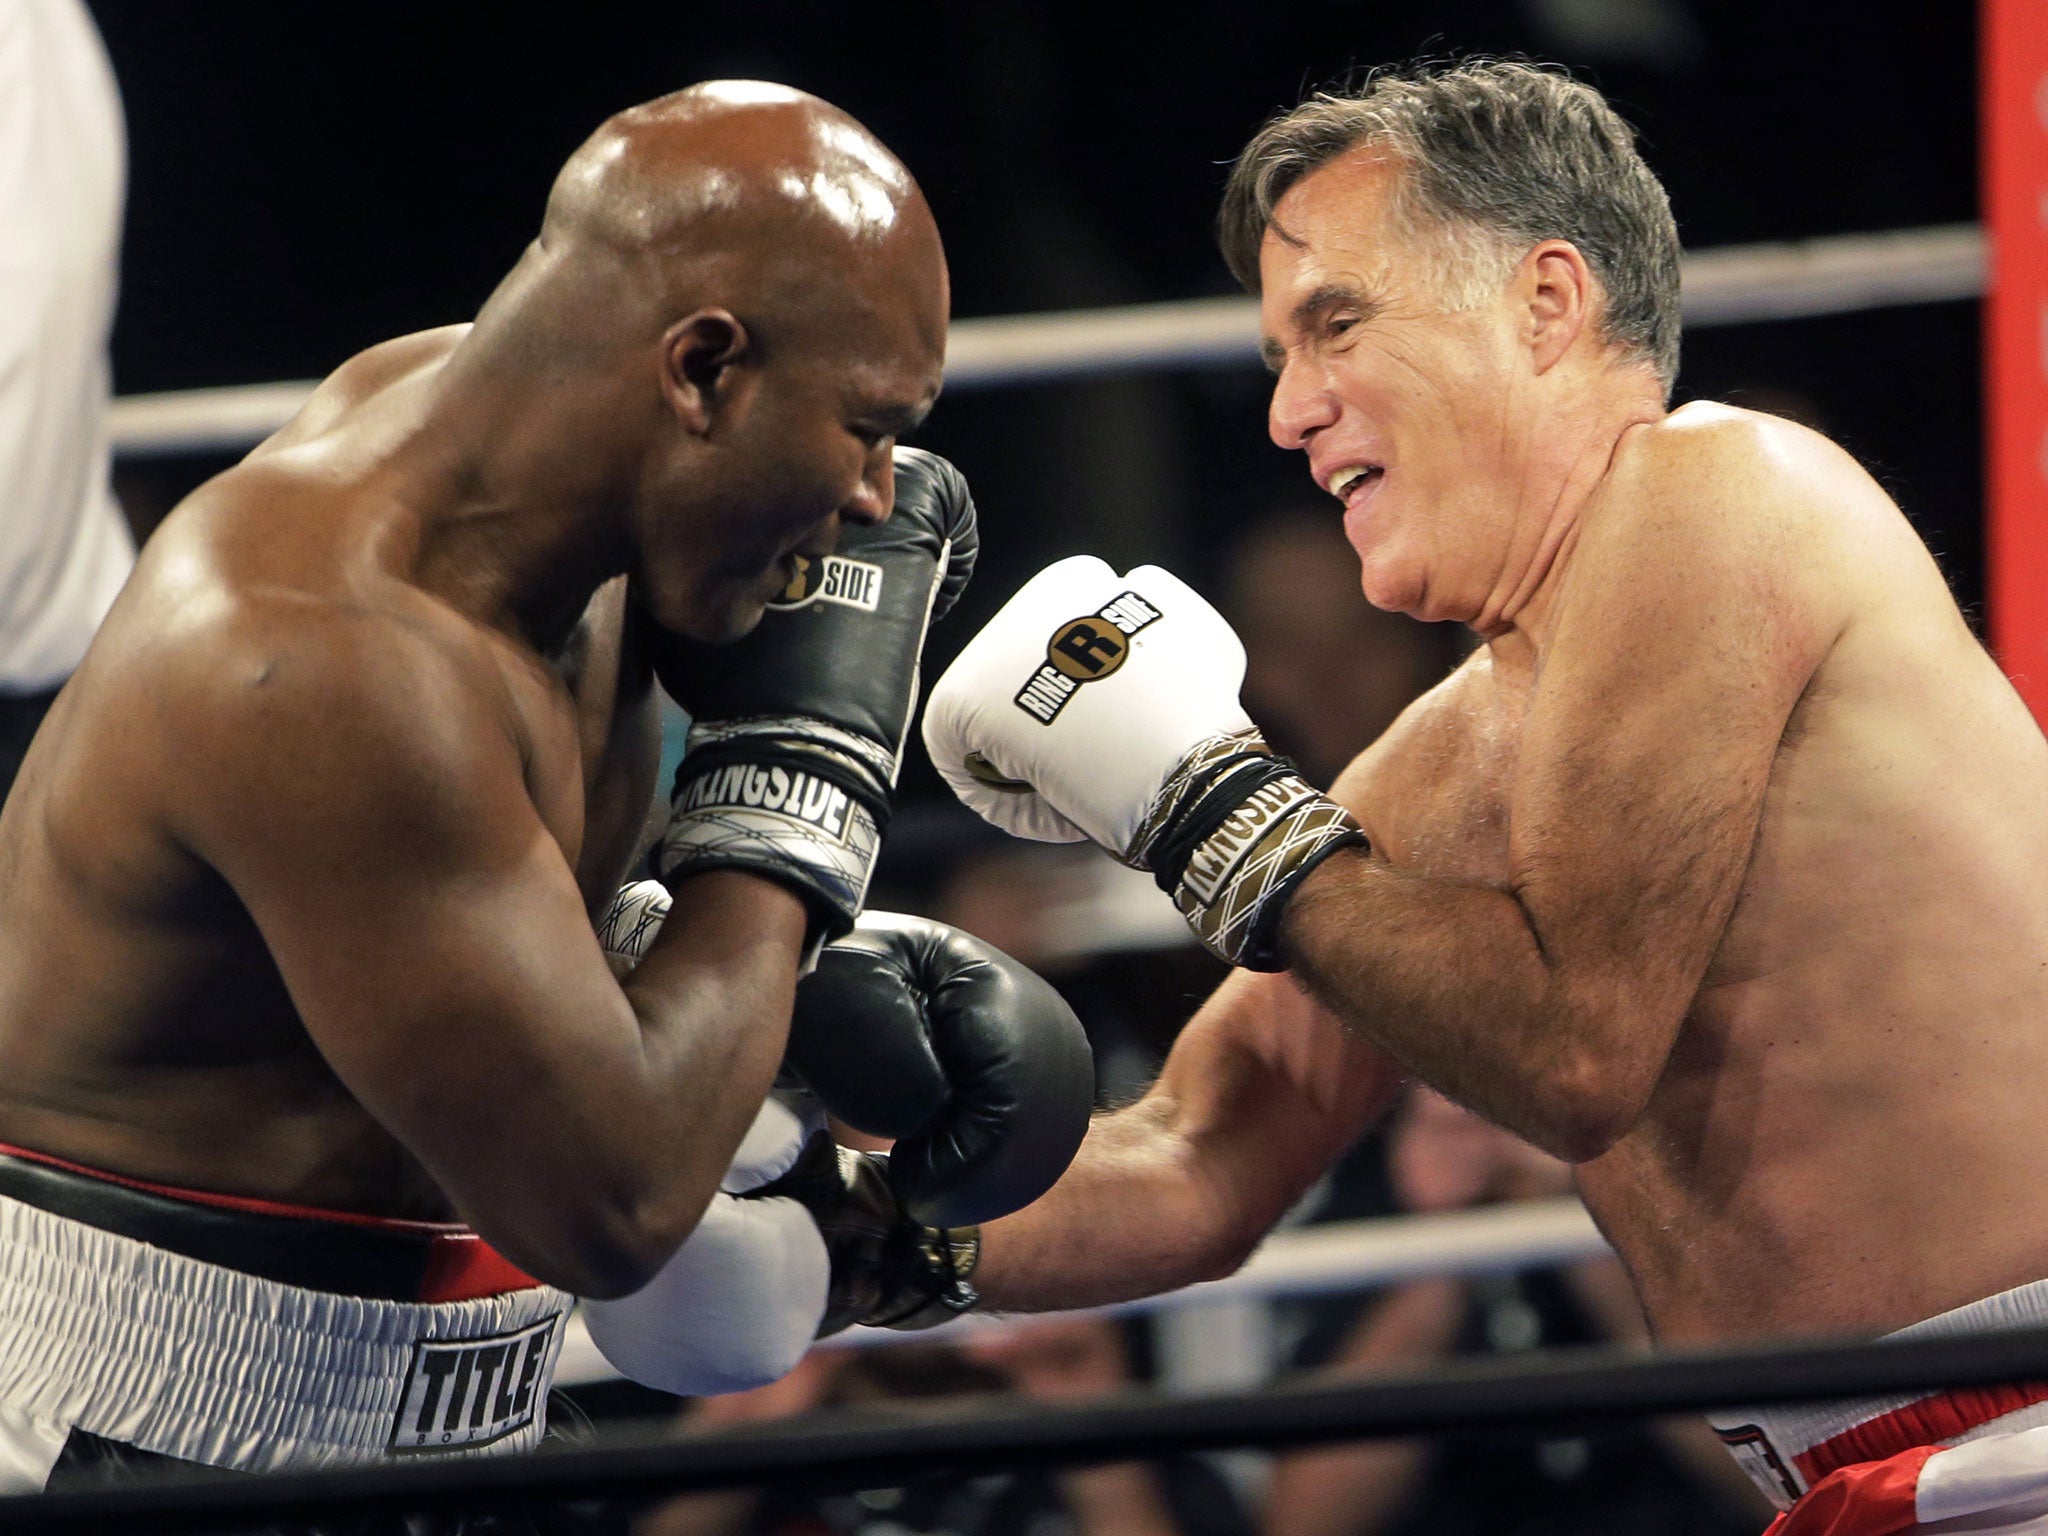 Former Republican presidential candidate Mitt Romney, right, throws punches with five-time heavyweight boxing champion Evander Holyfield